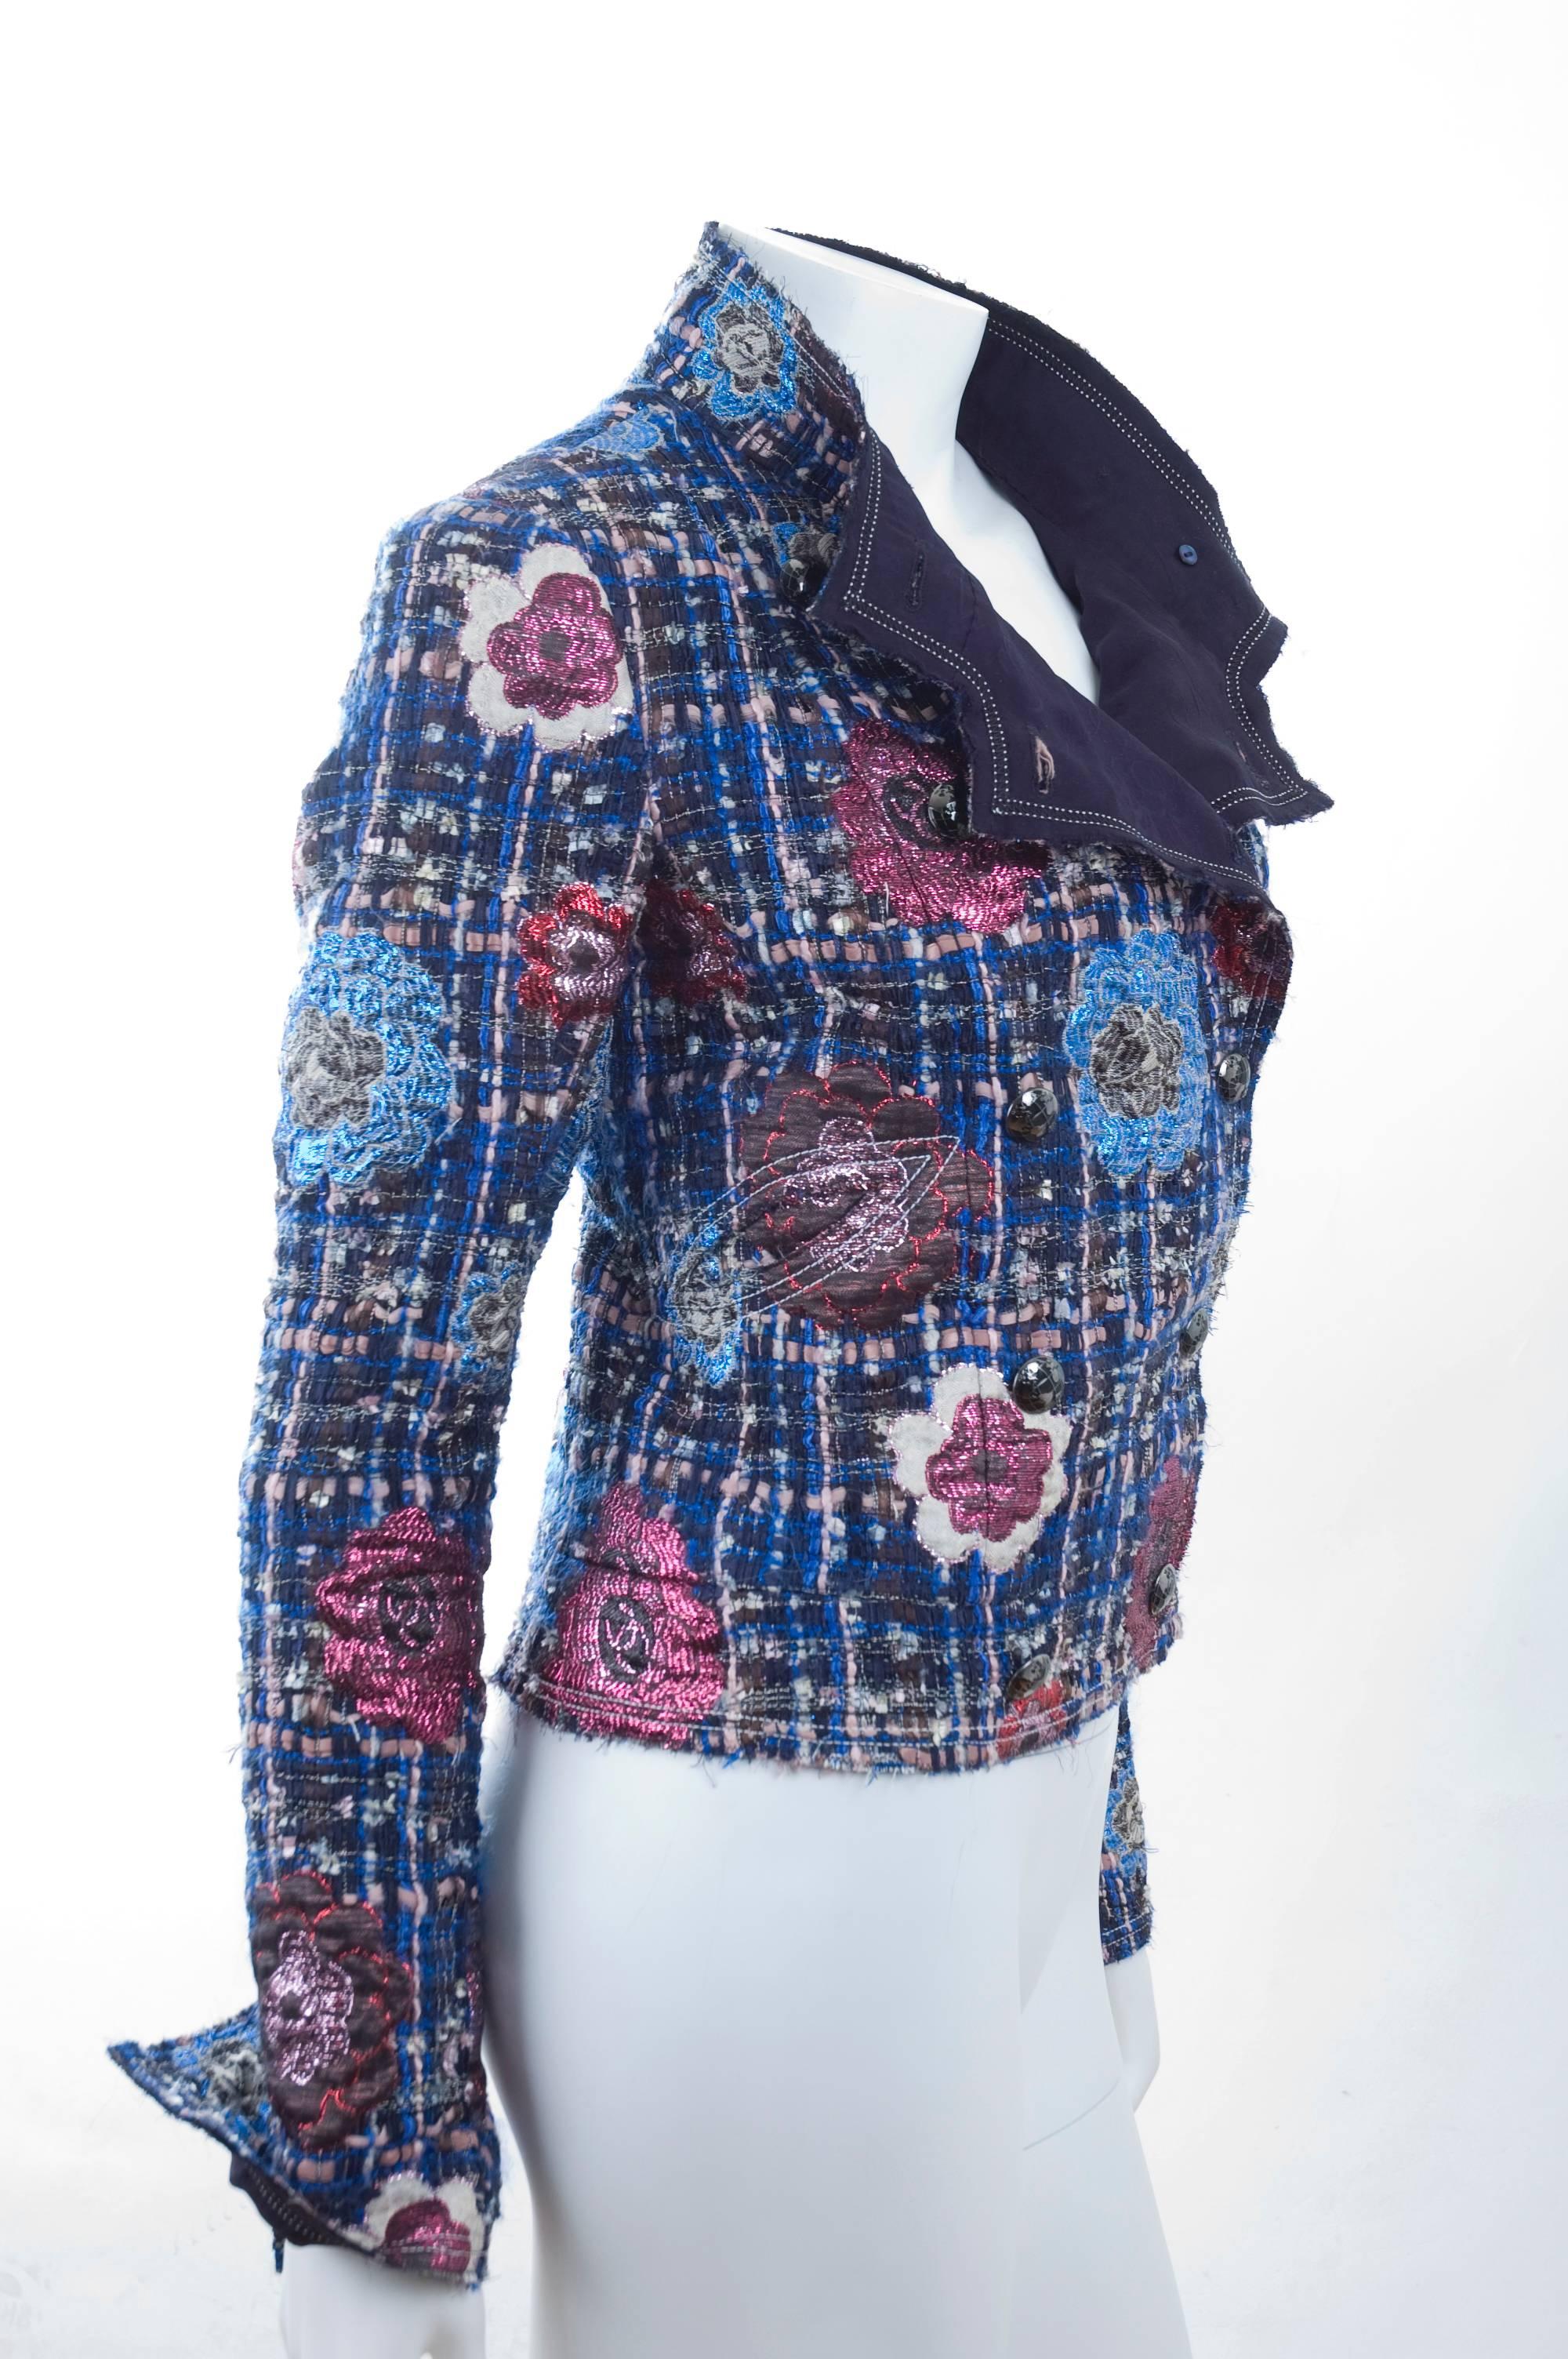 2008 Chanel Jacket with Metallic Camellias in Blue and Pink. For Sale 3